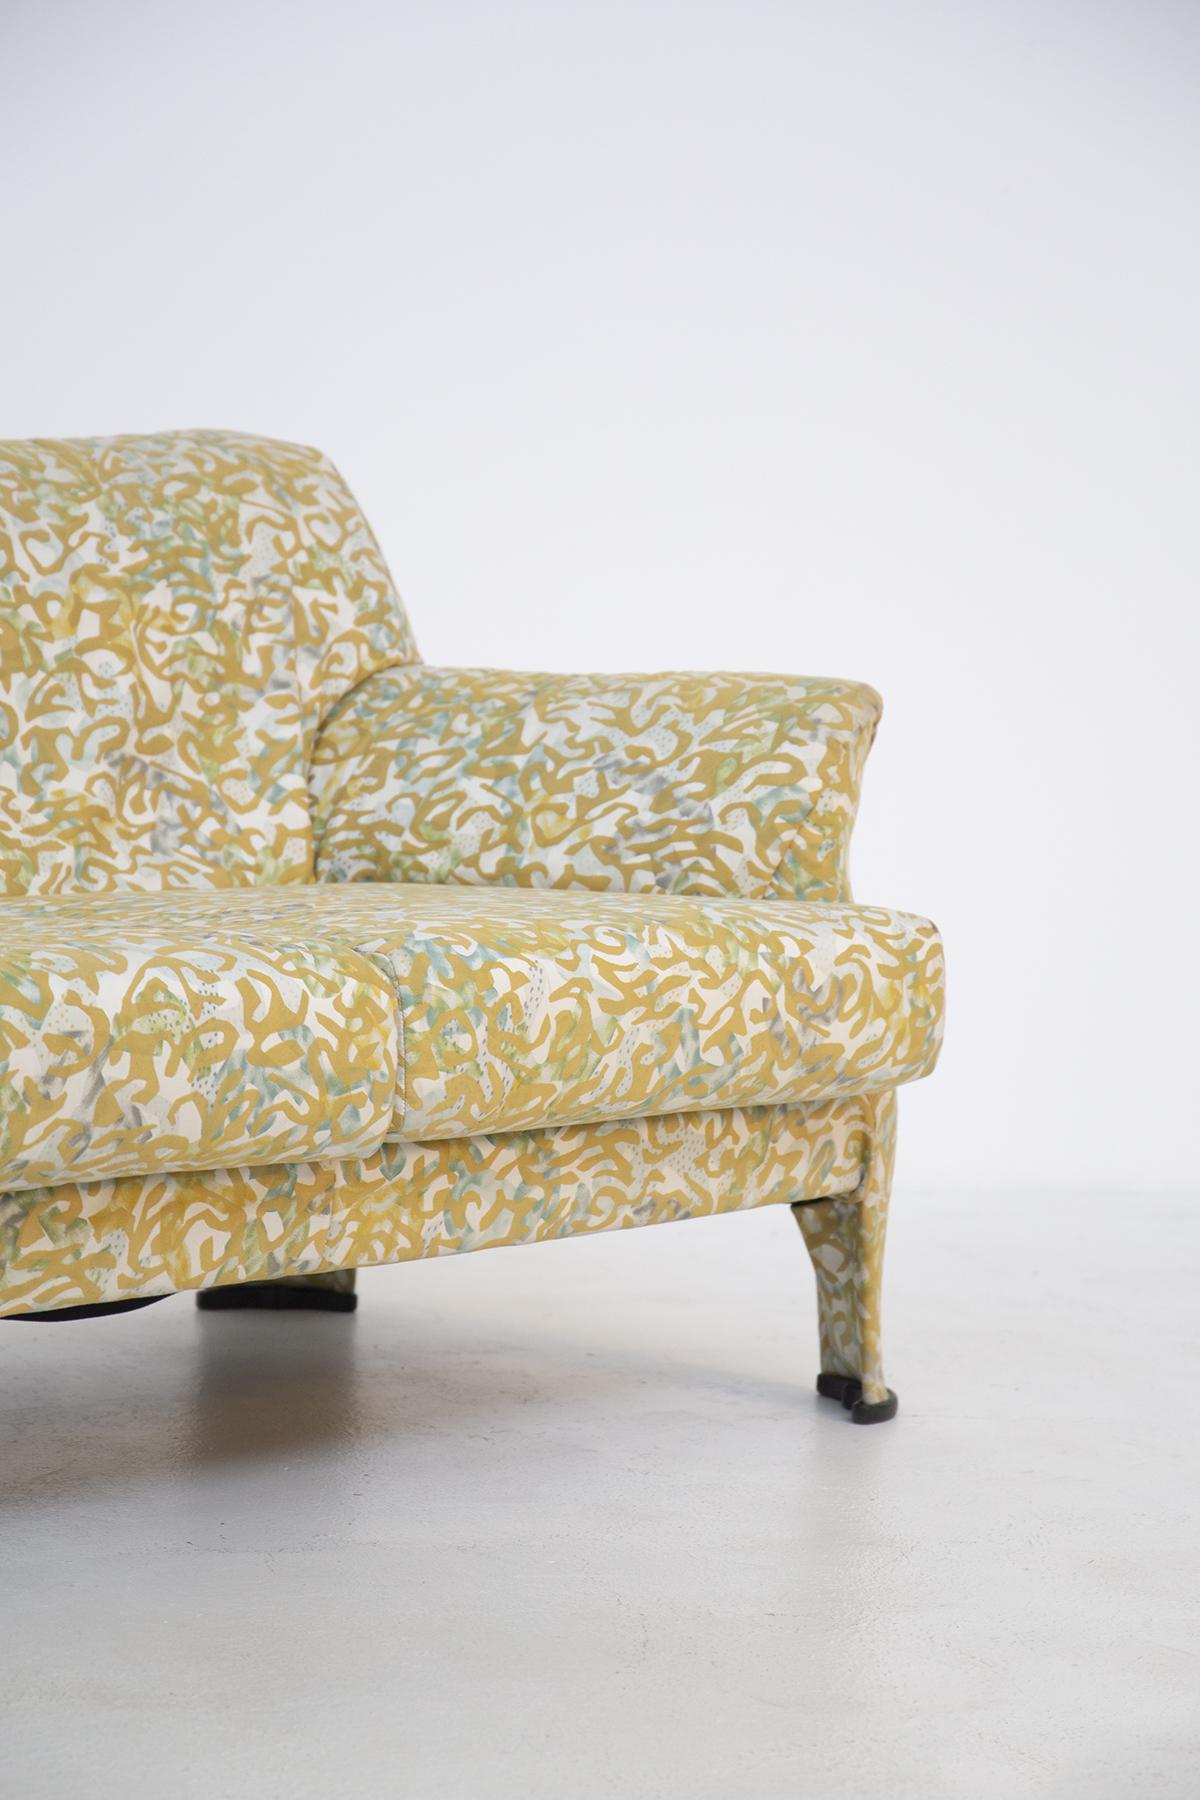 Rare sofa in the style of Milo Baughman in original fabric designed by Jake Lenor Larsen in the 1960s.
The fabric is in good and original vintage condition, the vintage sofa is a three seater. The fabric is colored yellow, teal on the ivory base.